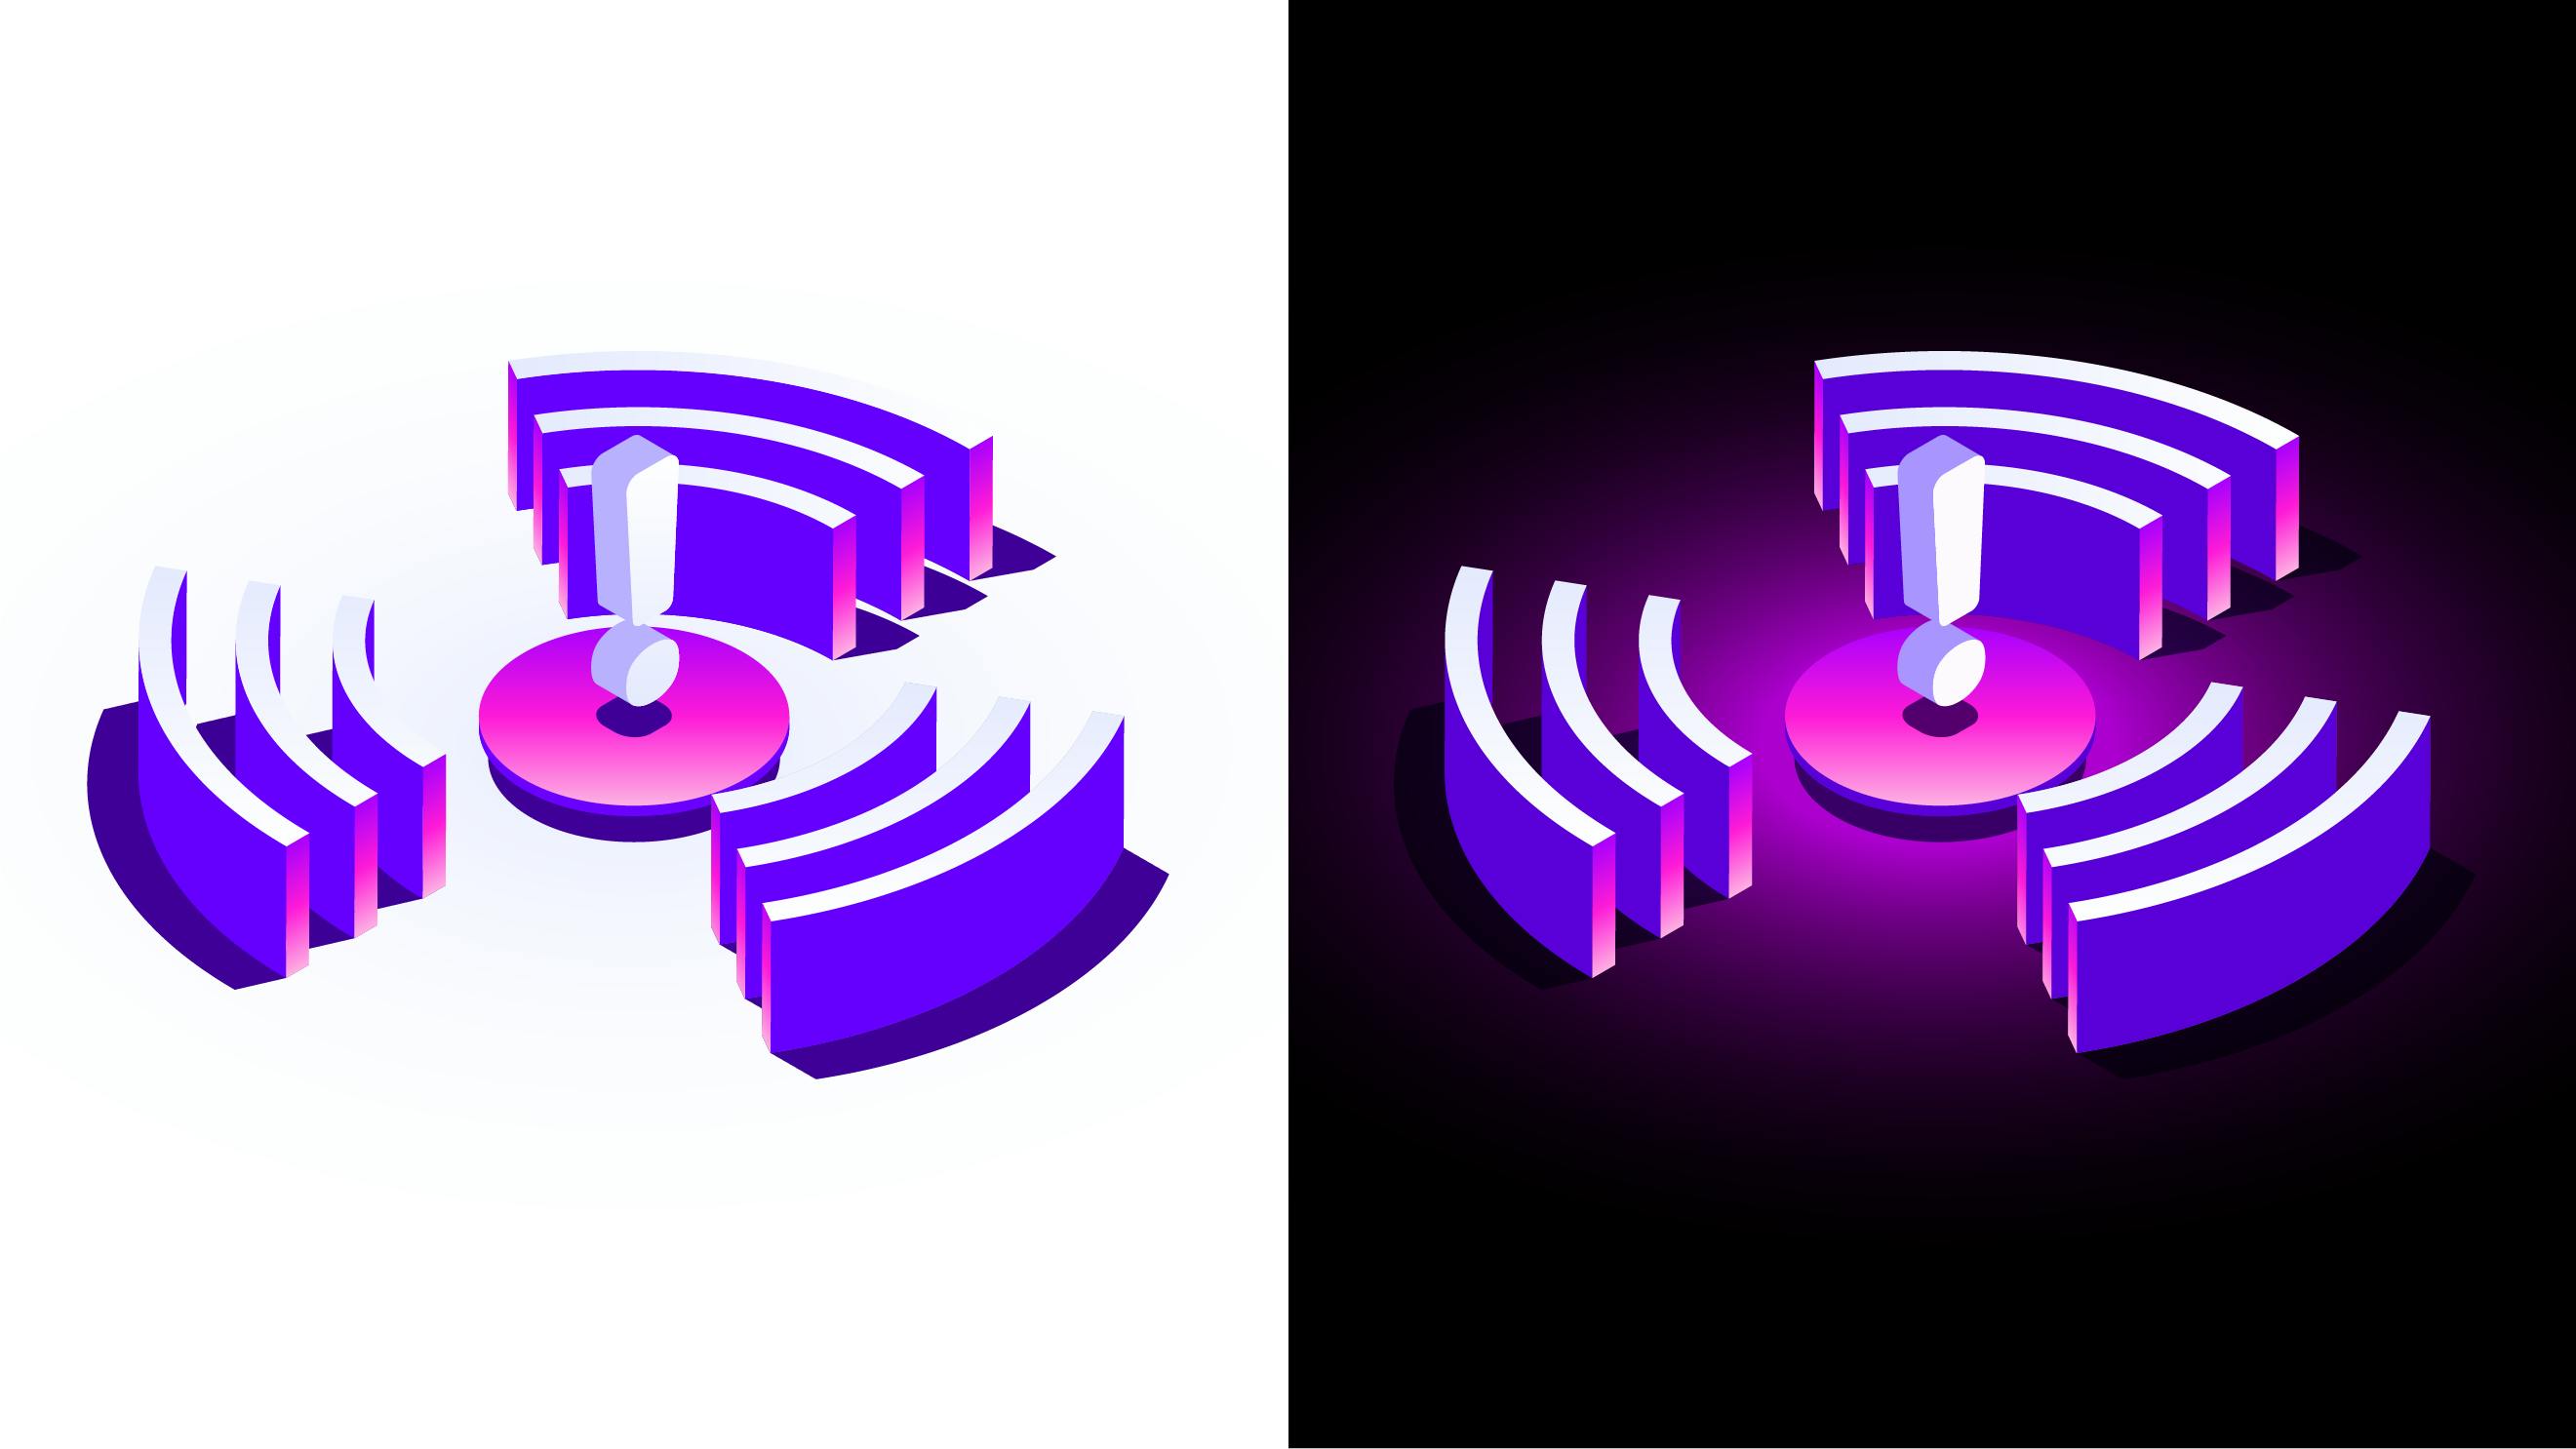 A split screen image with the Incident Management illustration on a white background on the left and on a dark background on the right. The Incident Managent illustration is in vivid color on both light and dark backgrounds- the exclamation point is white and lilac atop a pink and purple cylindrical shape and surrounded by white, purple, and pink concentric semicircles with dark purple shadows.